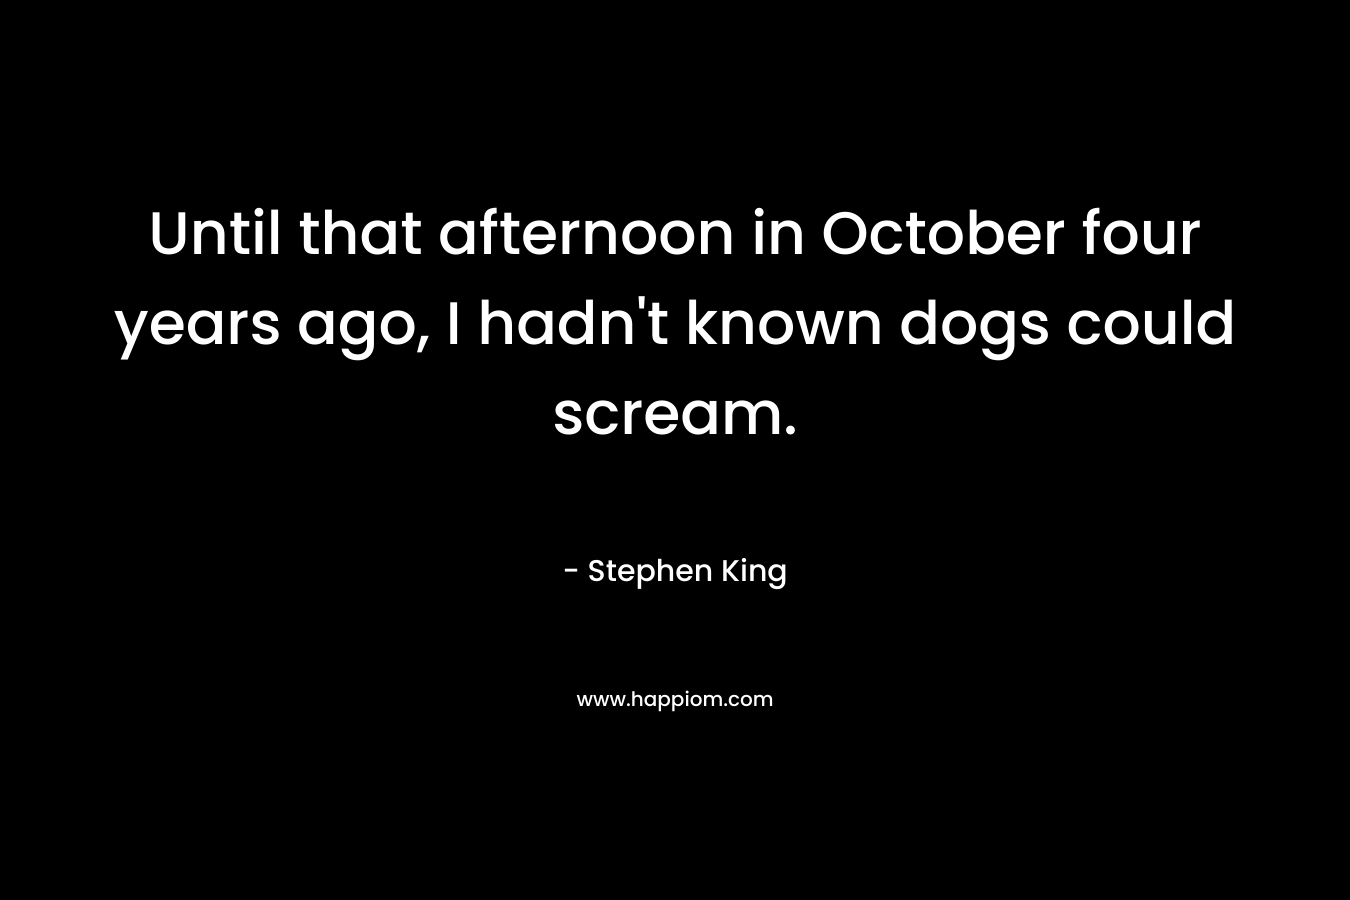 Until that afternoon in October four years ago, I hadn’t known dogs could scream. – Stephen King